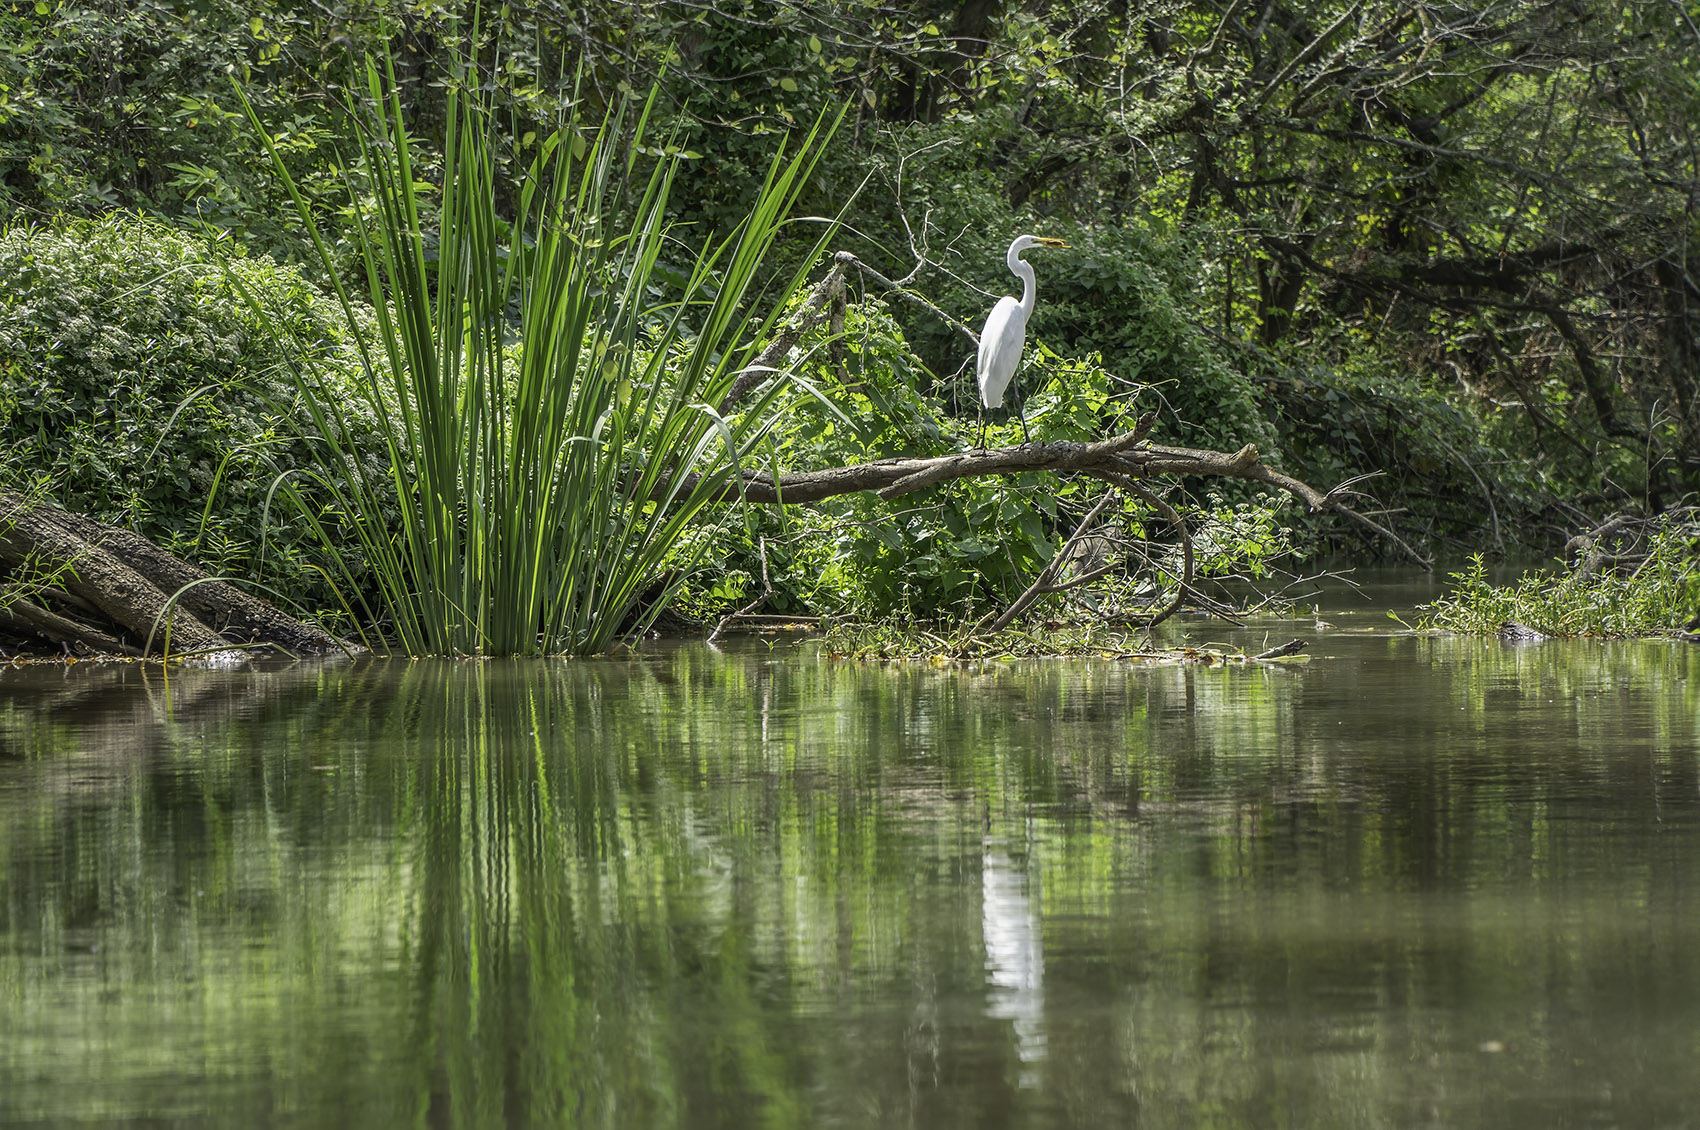 white egret on tree branch along bayou with tall grasses